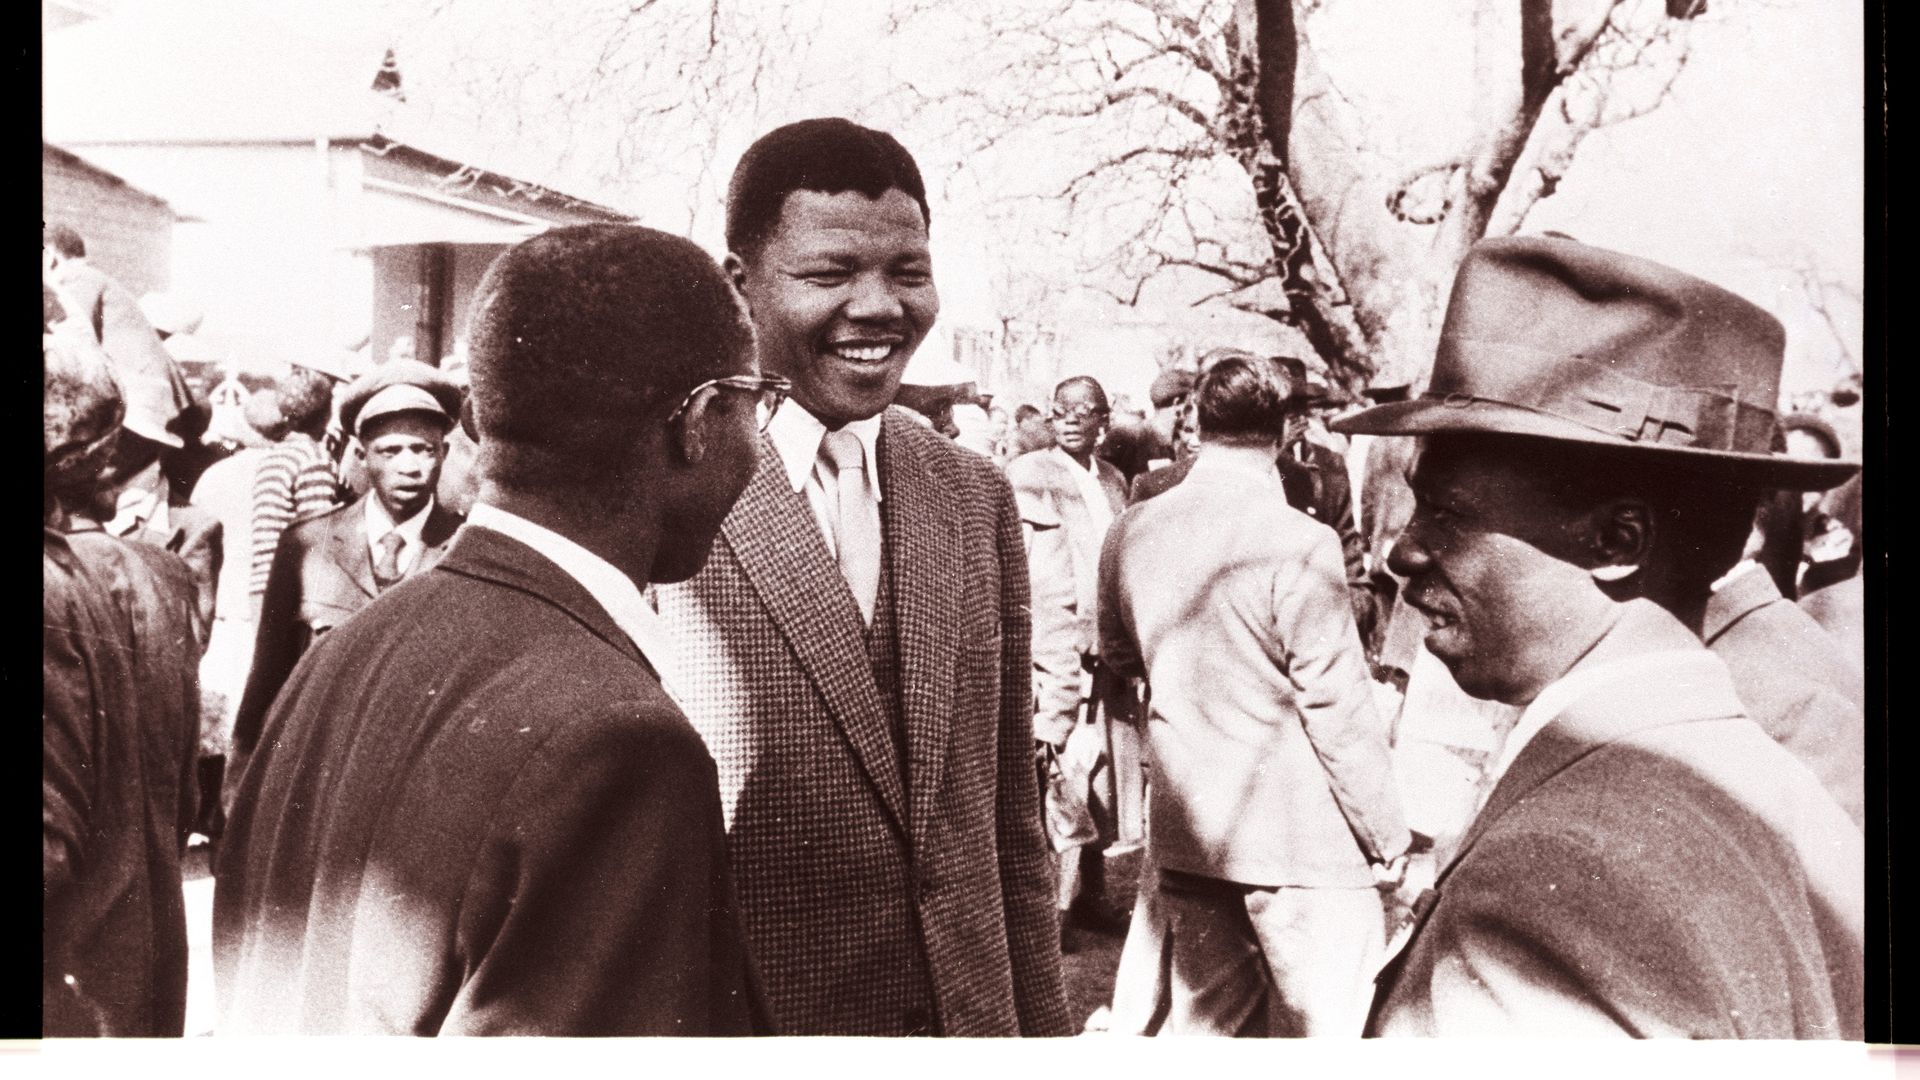 Nelson Mandela speaking with codefendants outside the "Treason Trial" late 1950's in South Africa.